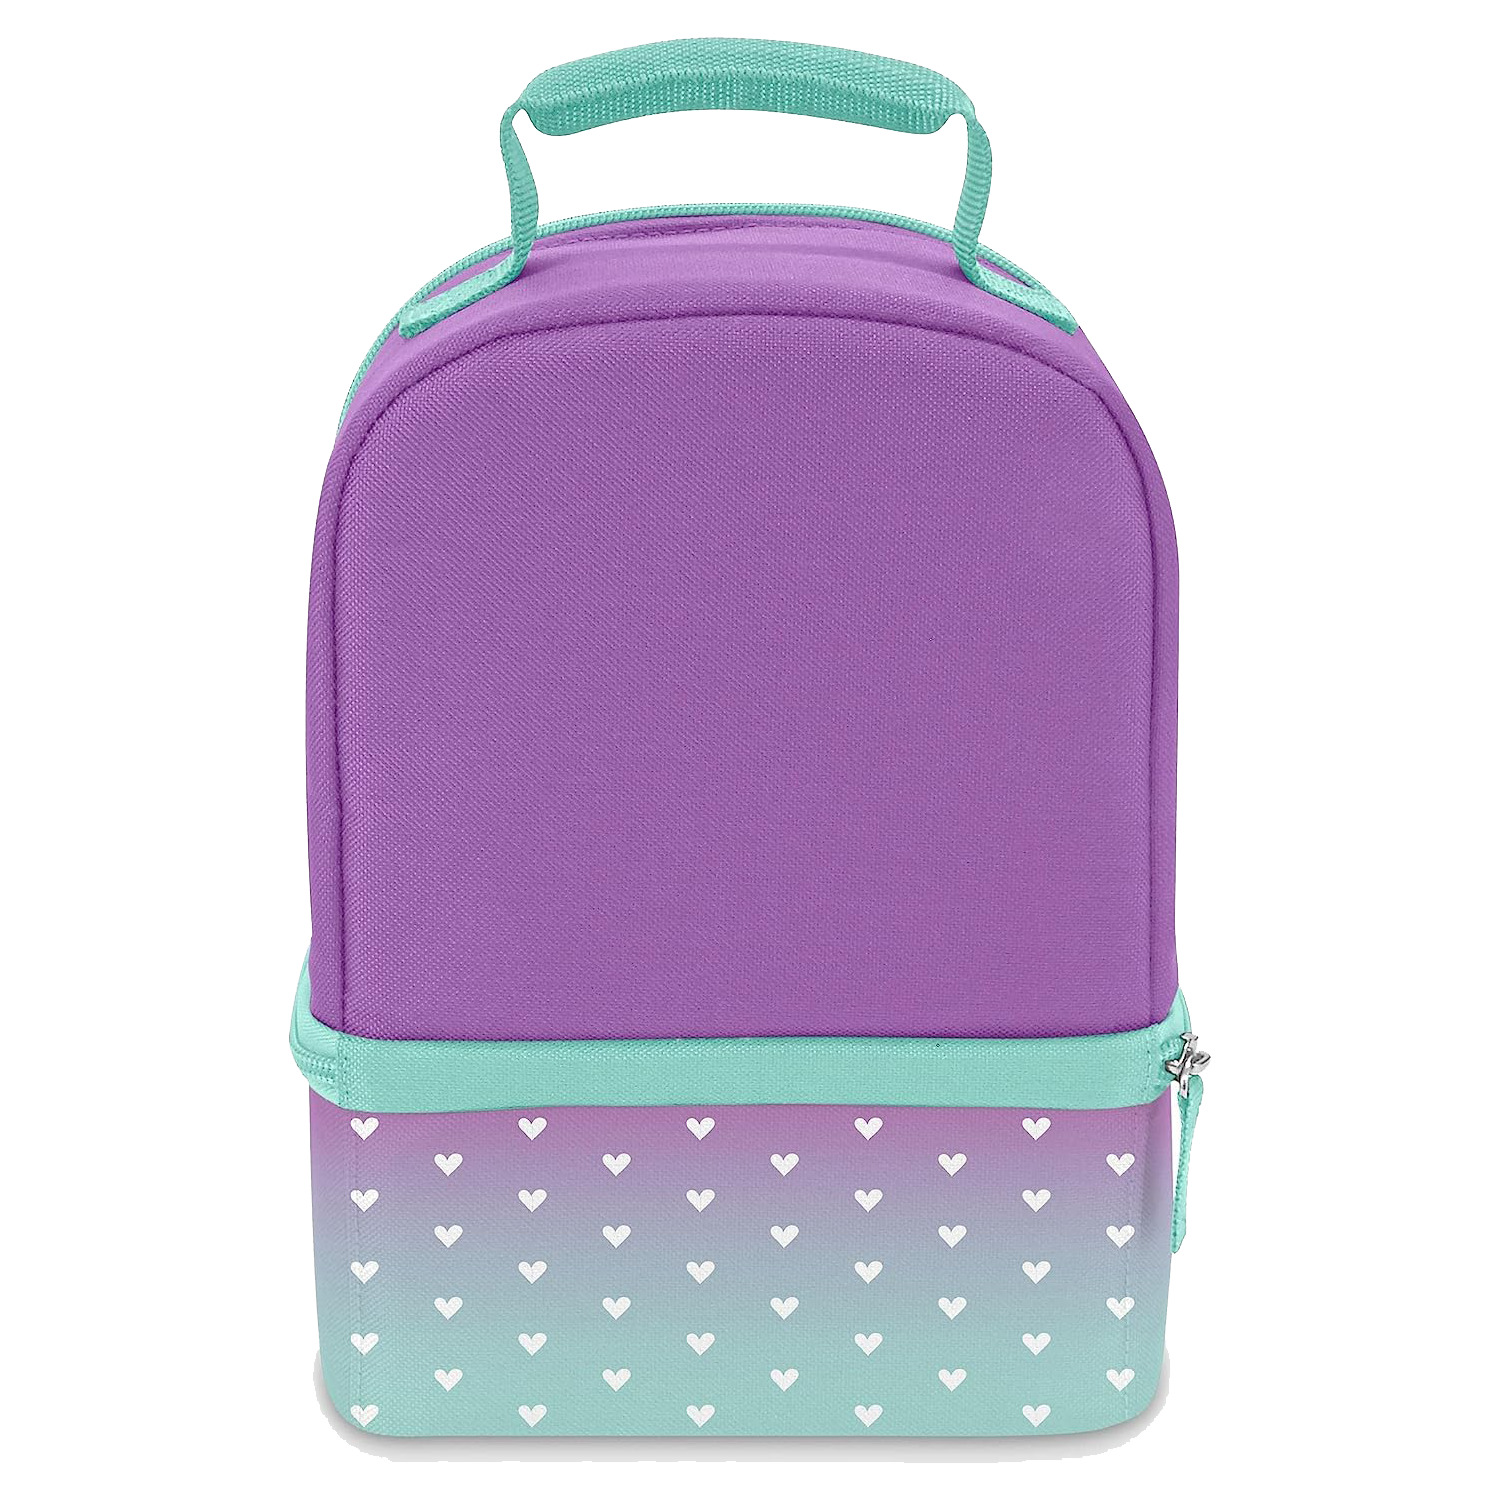 Thermos Kids Dual Lunch Box, Galaxy Teal